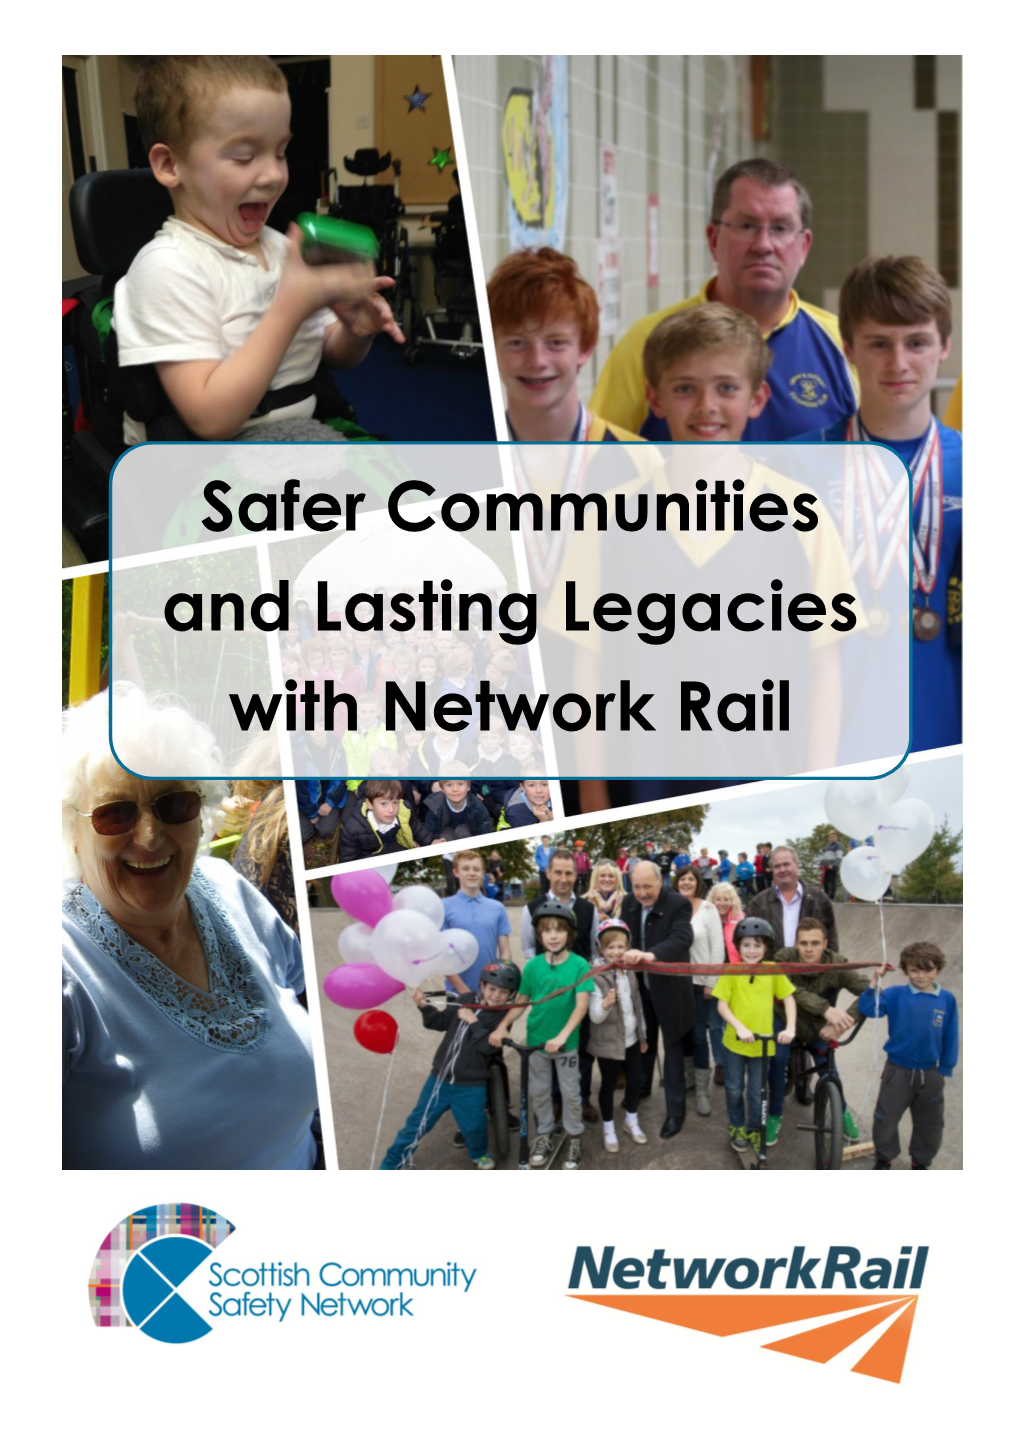 Safer Communities and Lasting Legacies with Network Rail